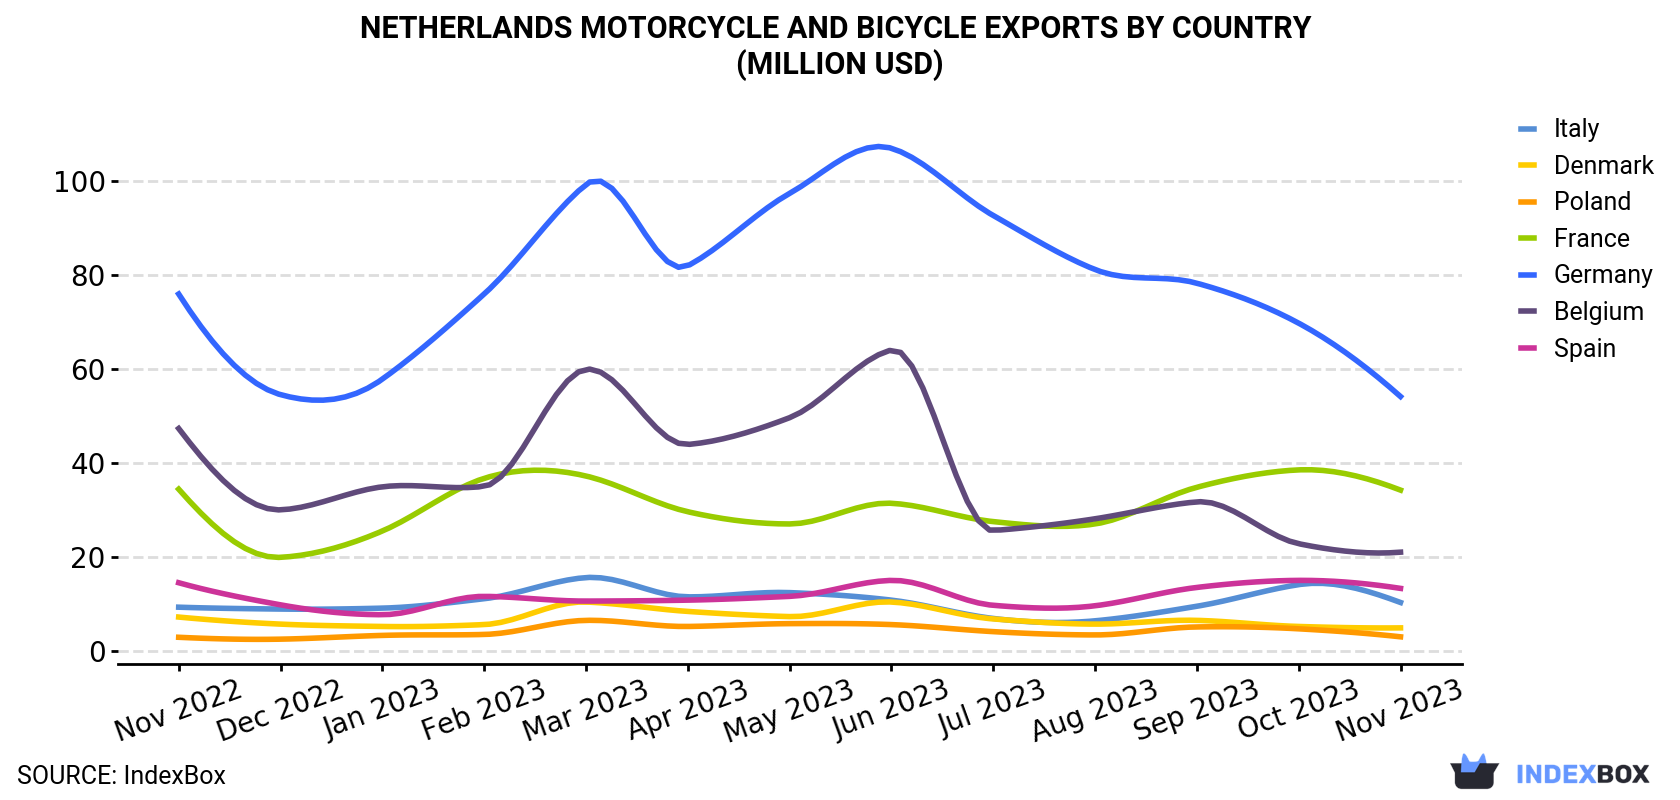 Netherlands Motorcycle And Bicycle Exports By Country (Million USD)